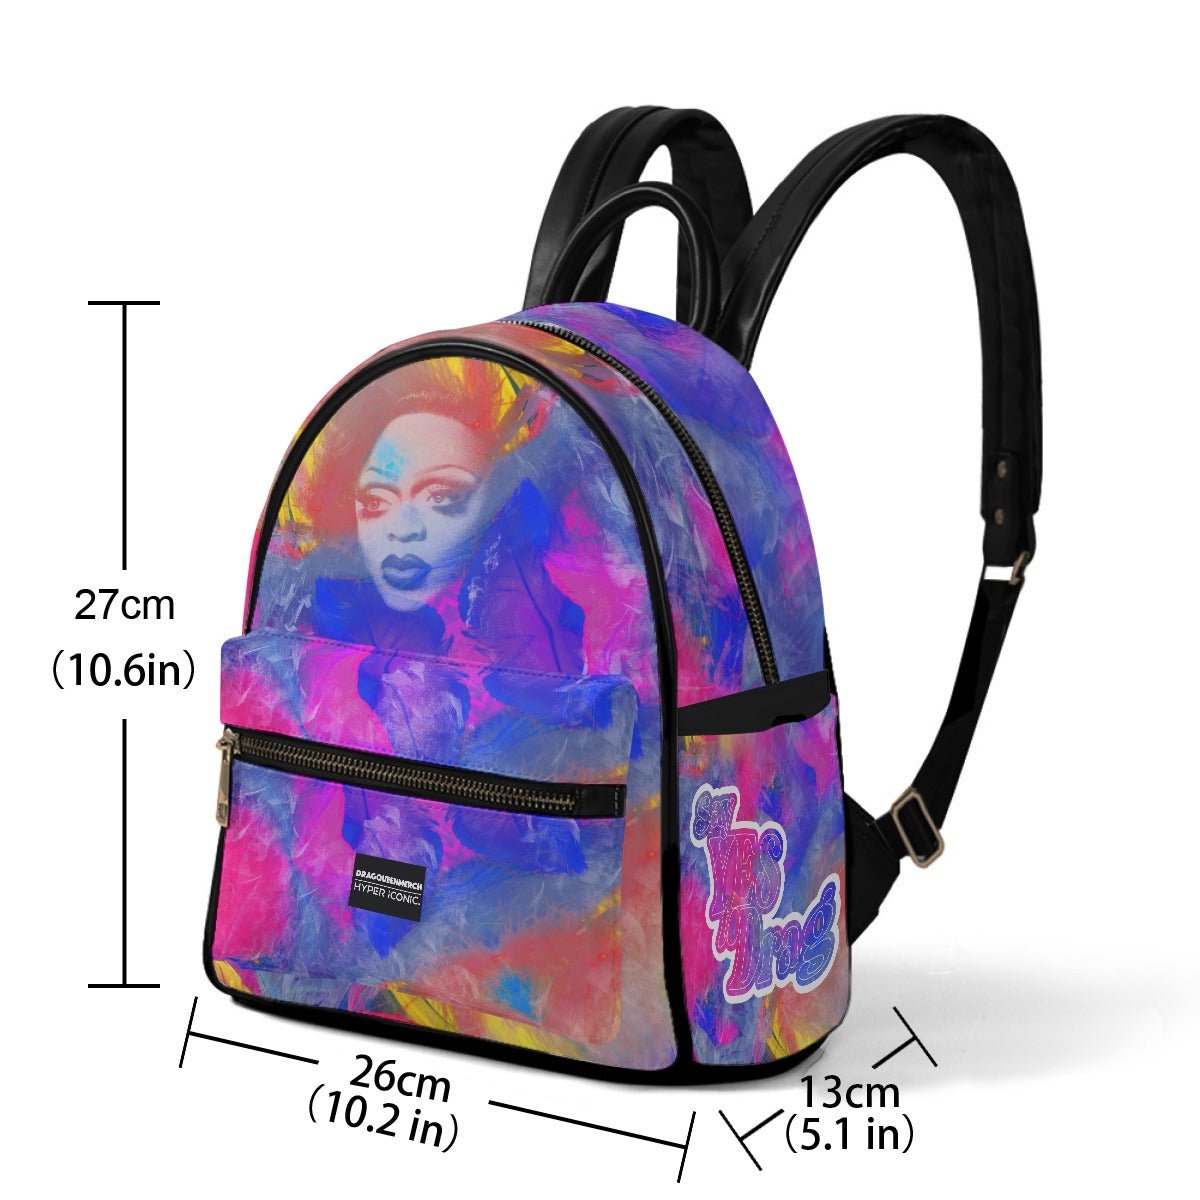 DQM X HYPER iCONiC. Kennedy Davenport Say Yes to Drag Mini Backpack - dragqueenmerch